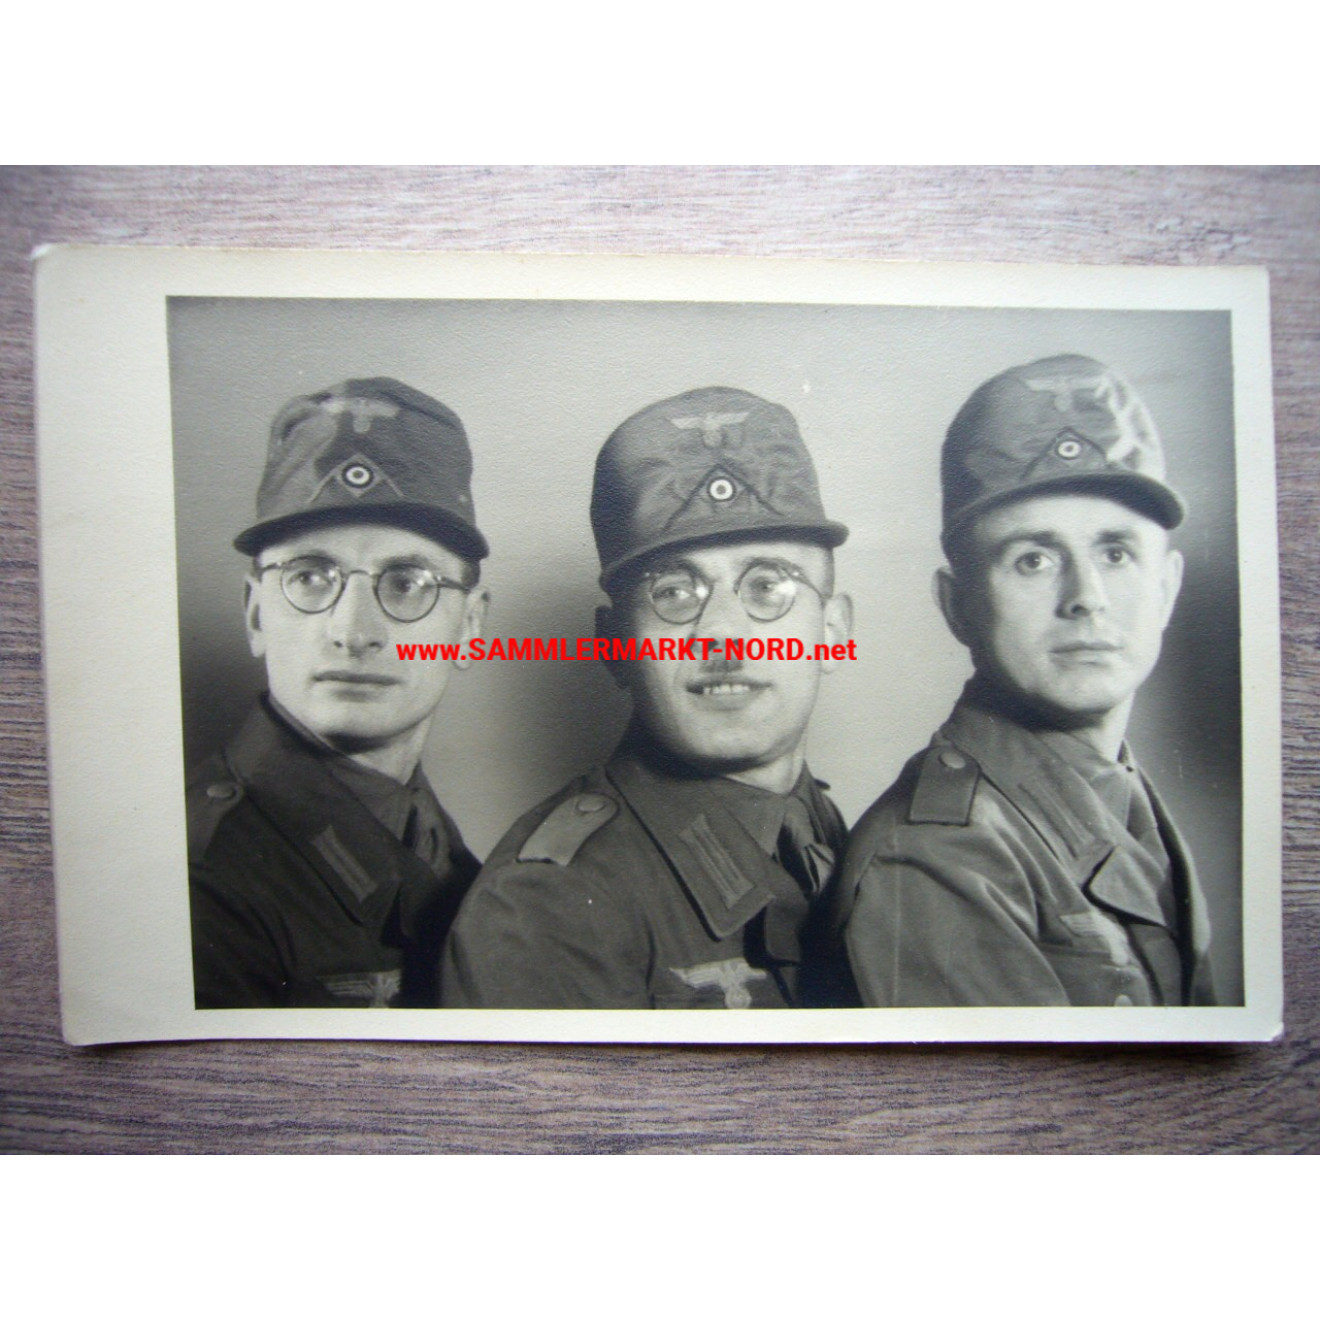 Wehrmacht soldiers in tropical uniform